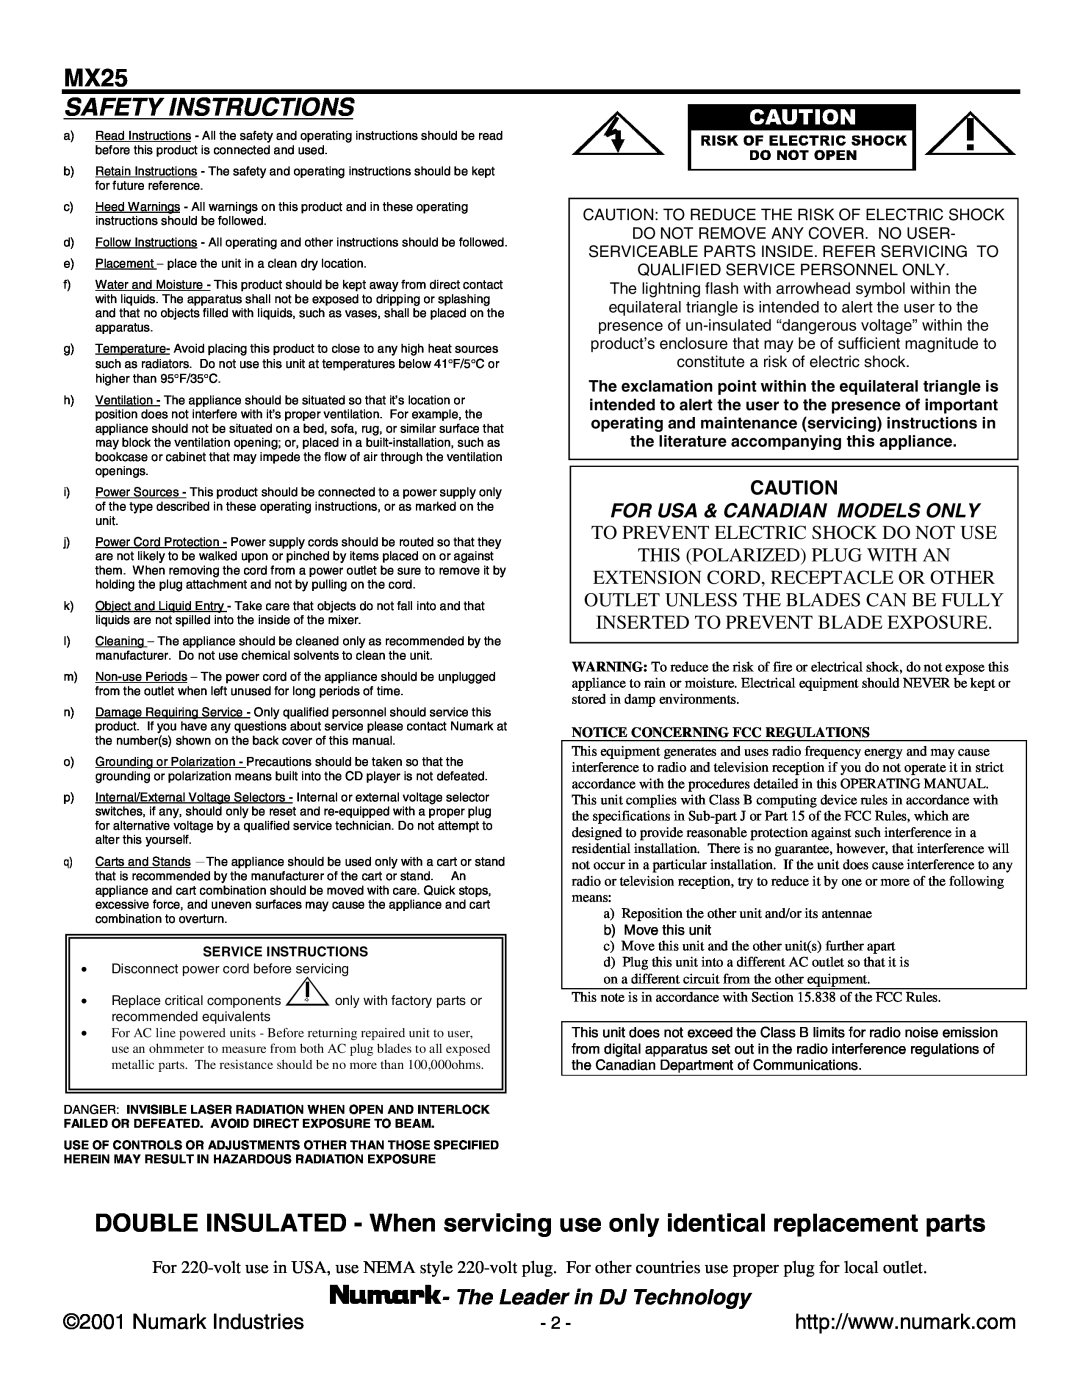 Numark Industries MX25 manual Safety Instructions, The Leader in DJ Technology, For Usa & Canadian Models Only 